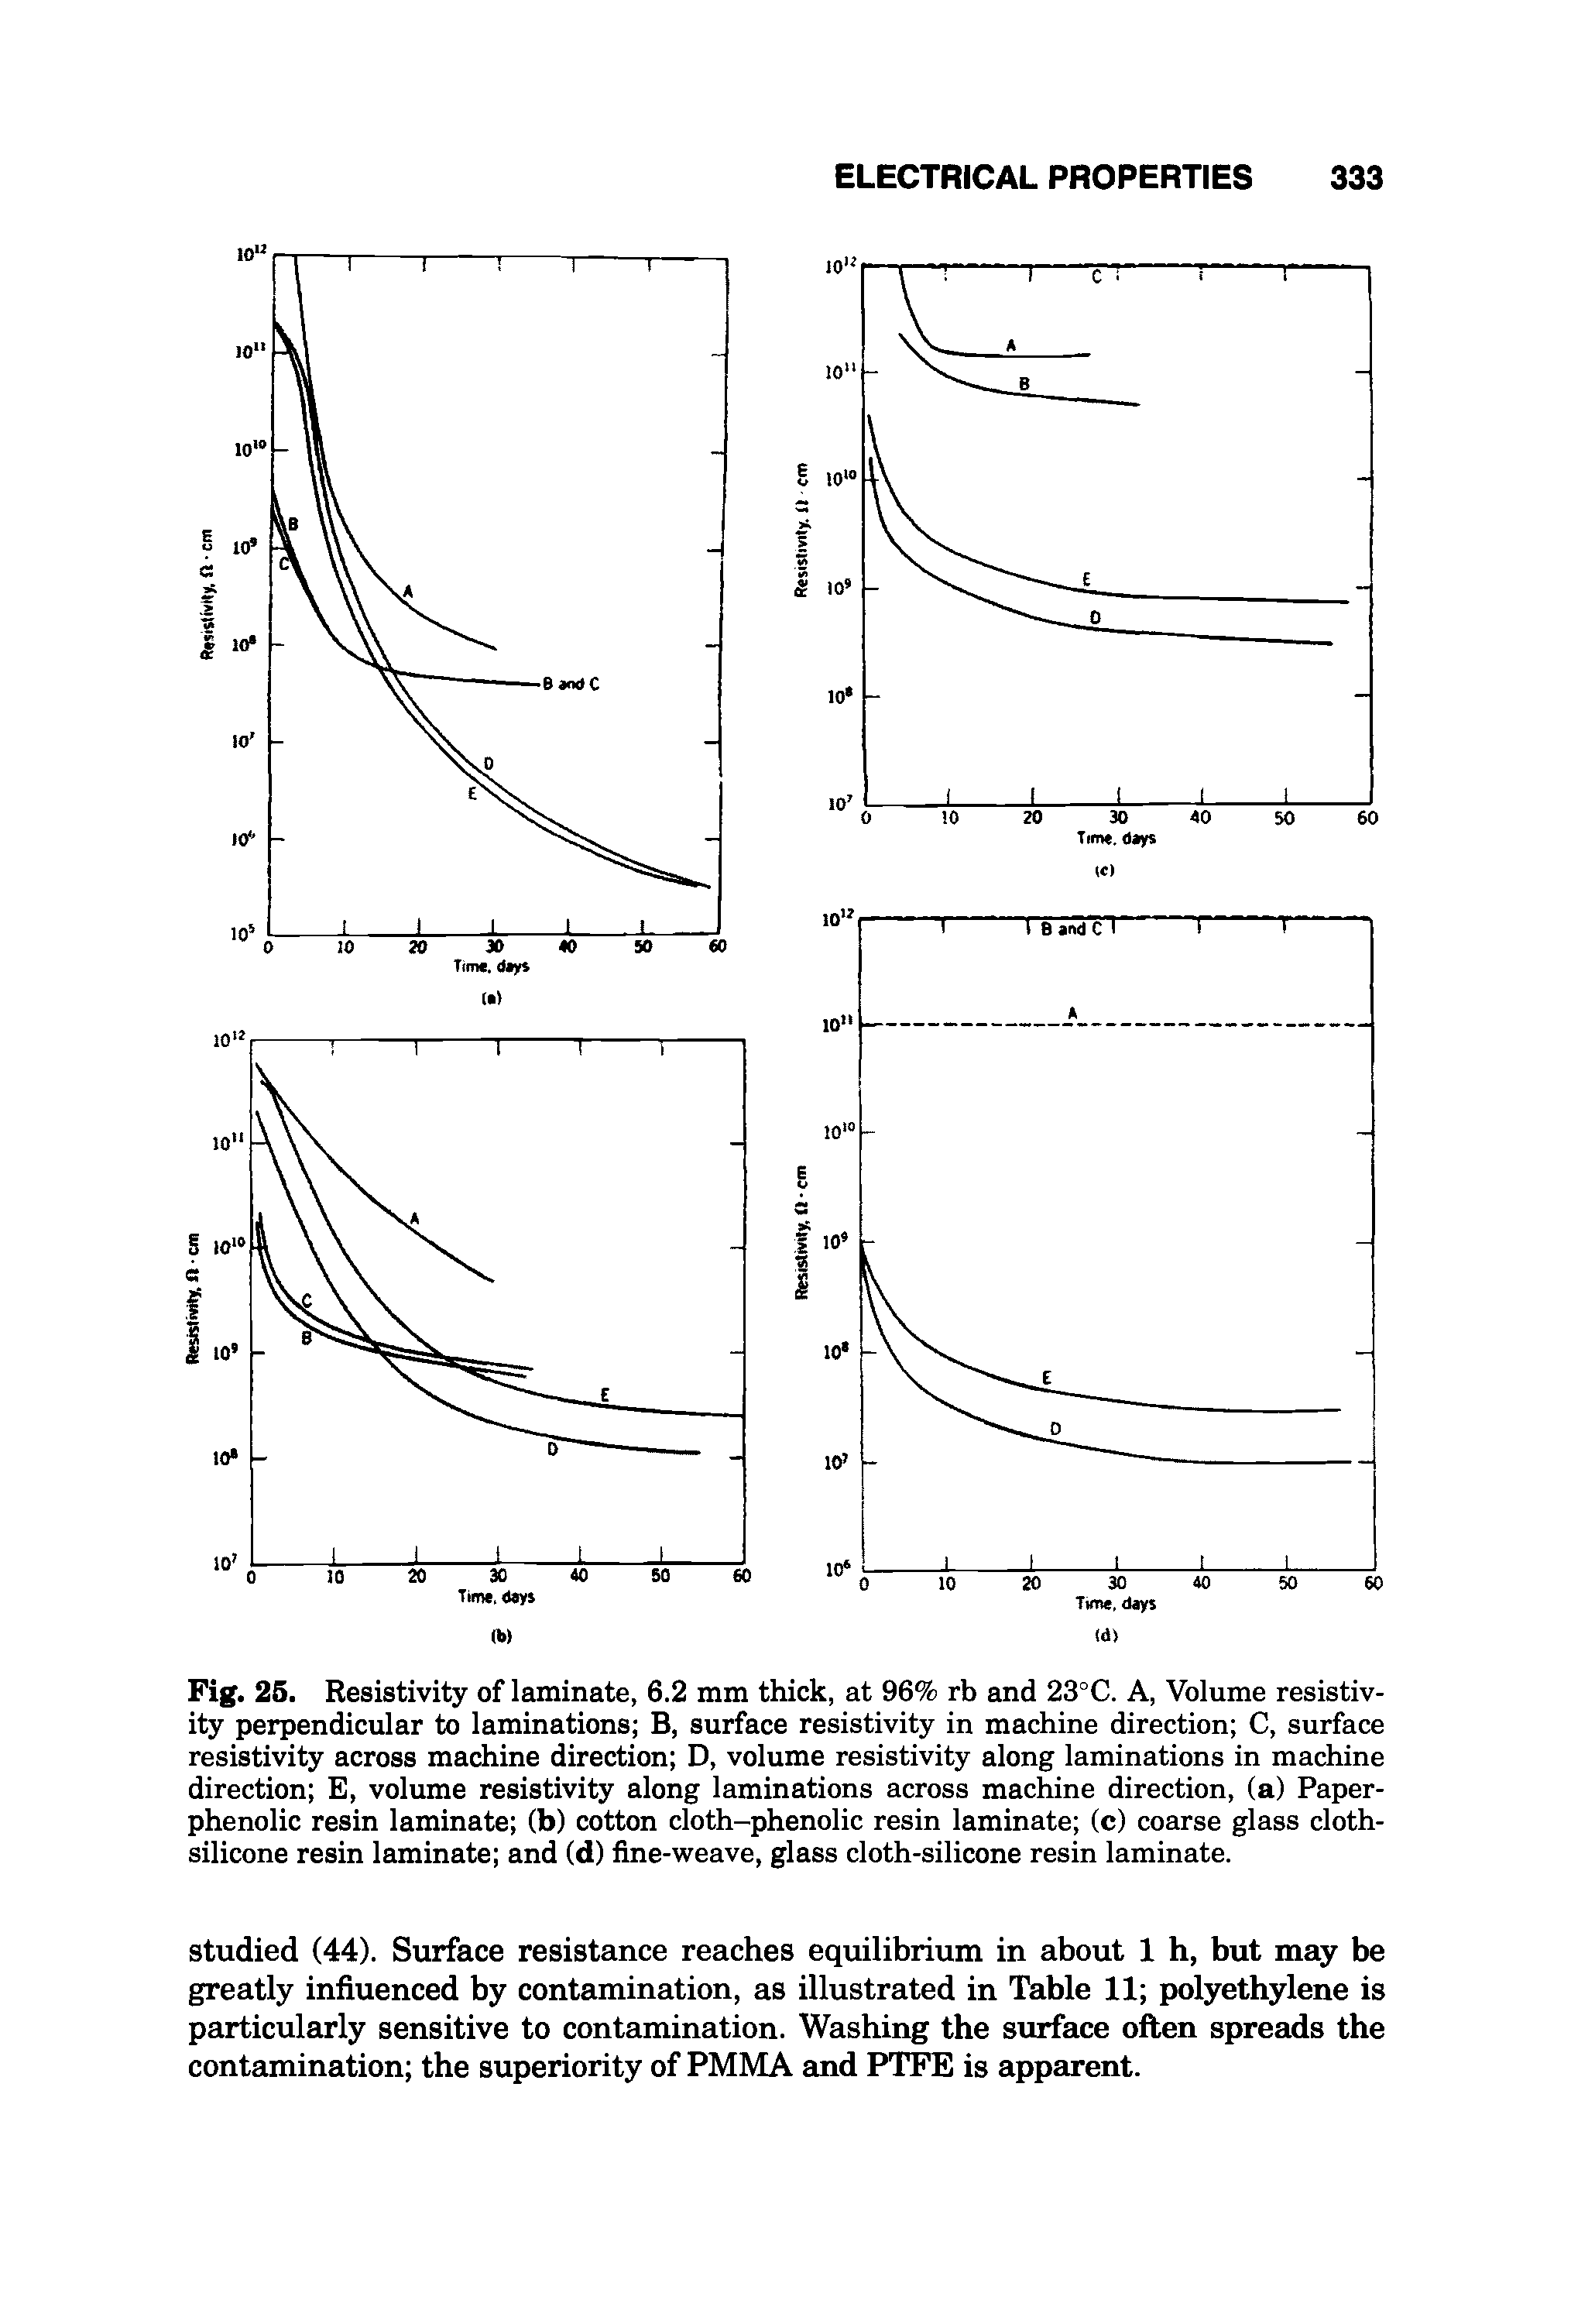 Fig. 25. Resistivity of laminate, 6.2 mm thick, at 96% rb and 23°C. A, Volume resistivity perpendicular to laminations B, surface resistivity in machine direction C, surface resistivity across machine direction D, volume resistivity along laminations in machine direction E, volume resistivity along laminations across machine direction, (a) Paper-phenolic resin laminate (b) cotton cloth-phenolic resin laminate (c) coarse glass cloth-silicone resin laminate and (d) fine-weave, glass cloth-silicone resin laminate.